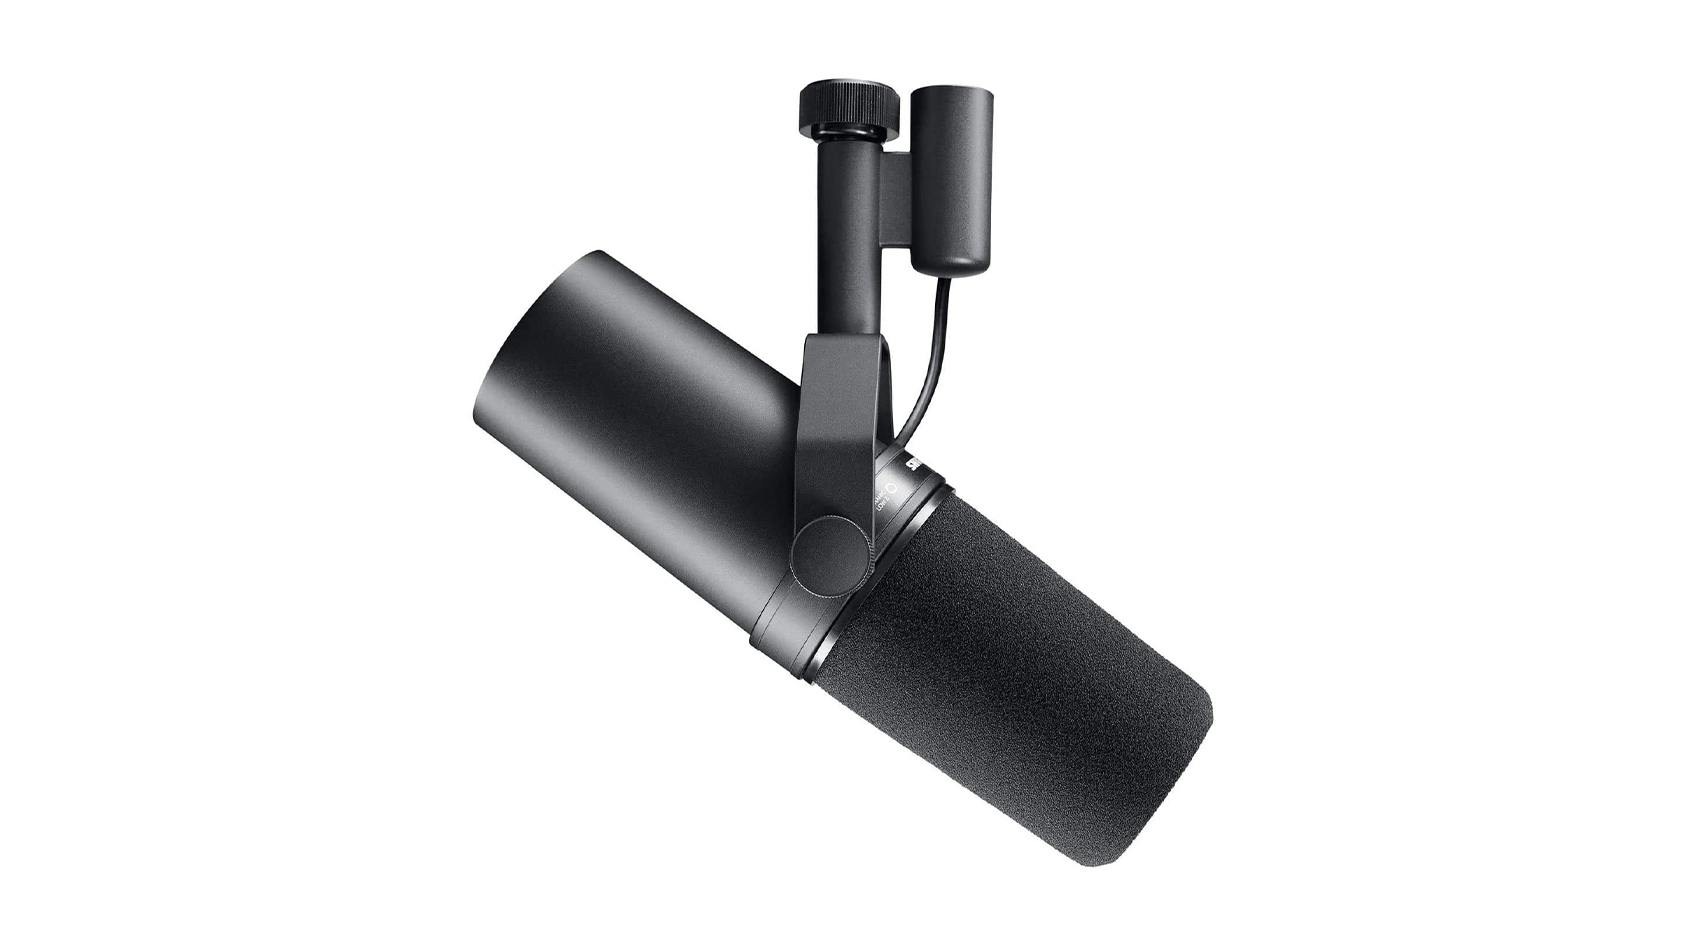 The Shure SM7B in profile against white background.